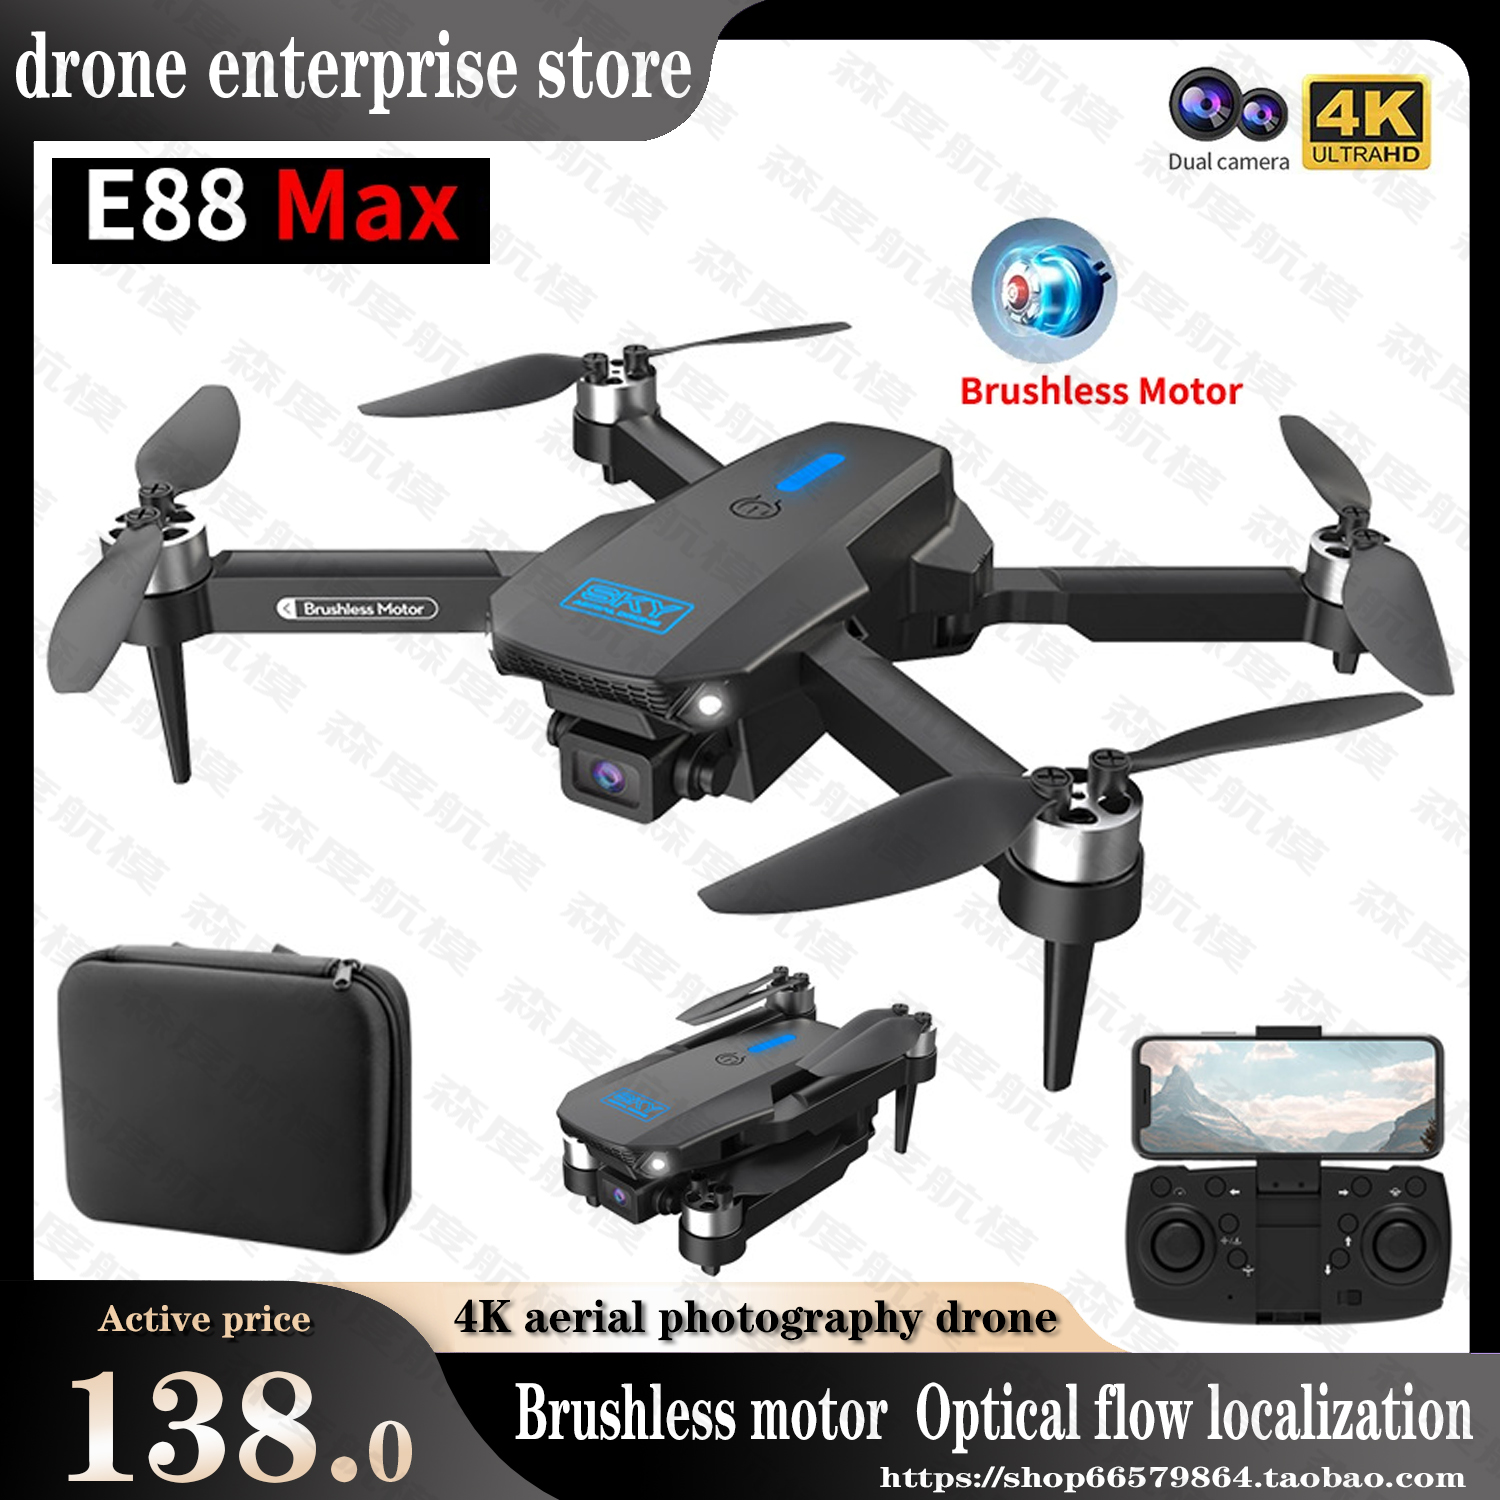 E88 Pro MAX WIFI FPV Drone RC Foldable Quadcopter Gift Toy